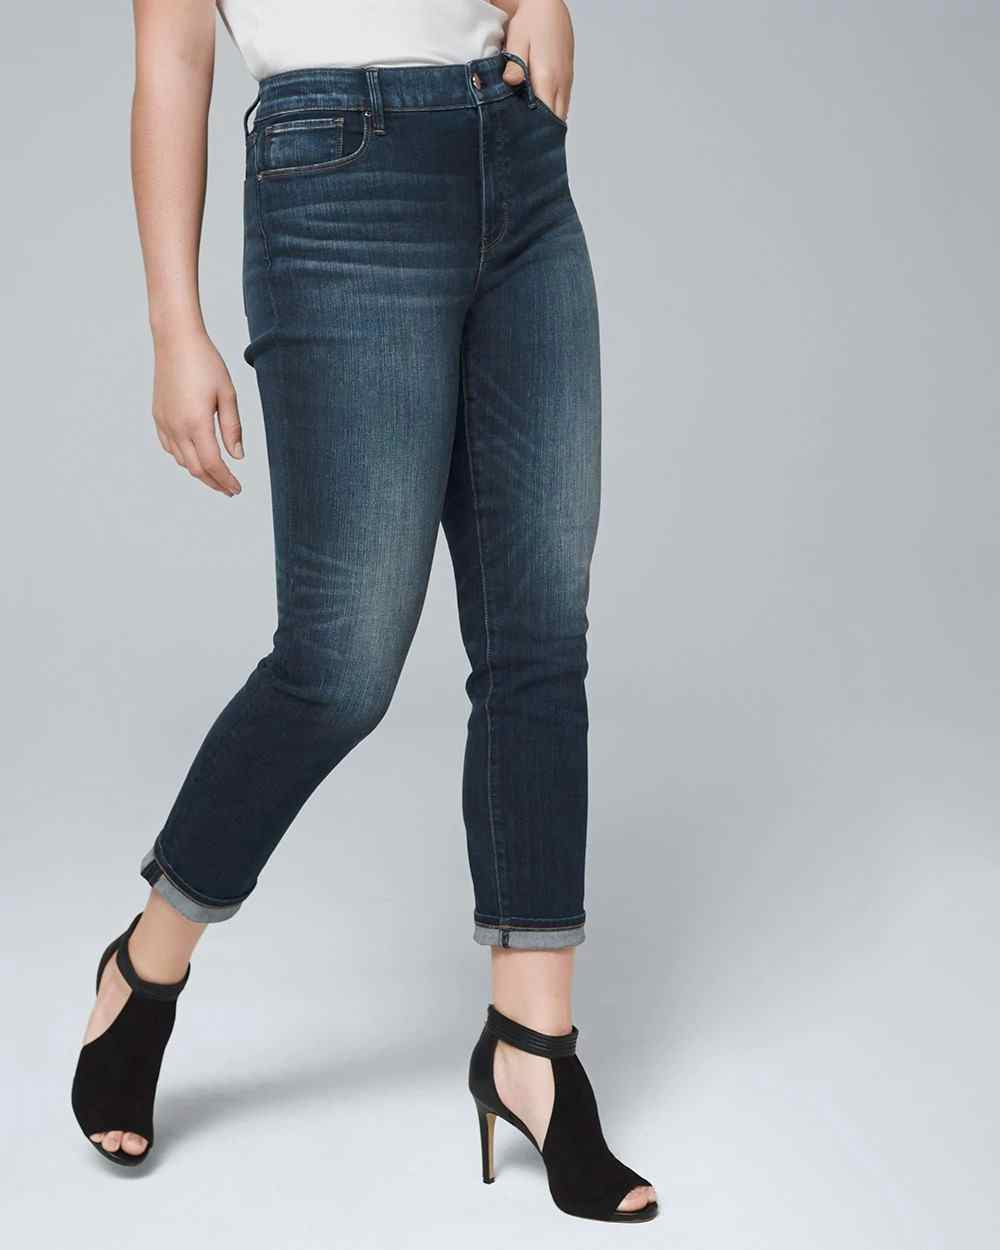 Curvy-Fit Mid-Rise Essential Slim Ankle Jeans | White House Black Market